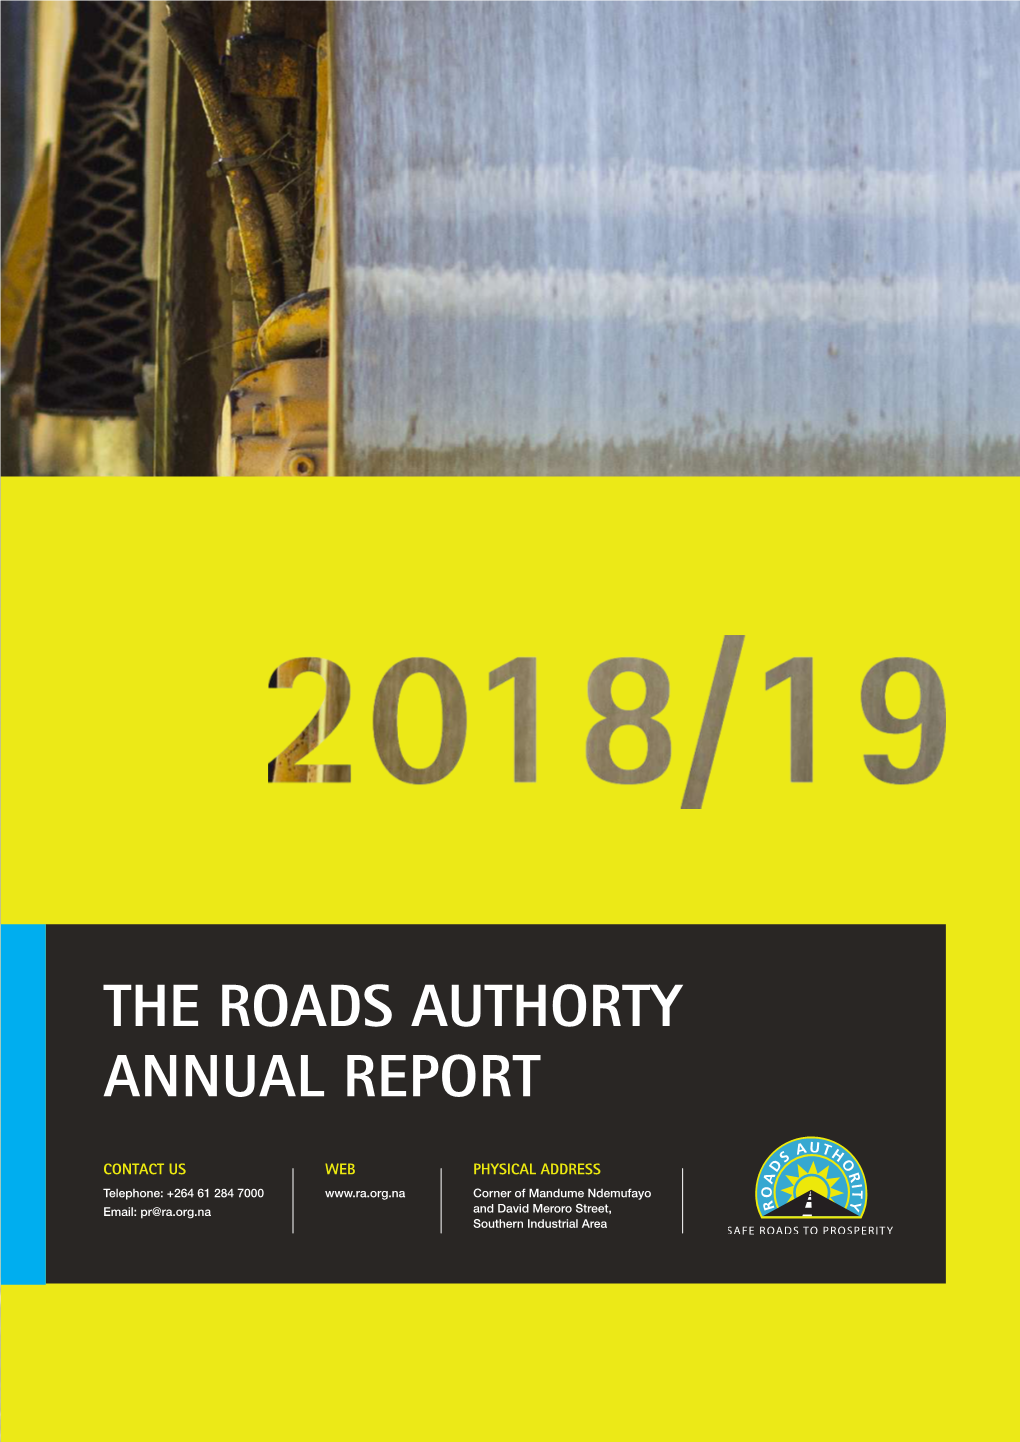 The Roads Authorty Annual Report